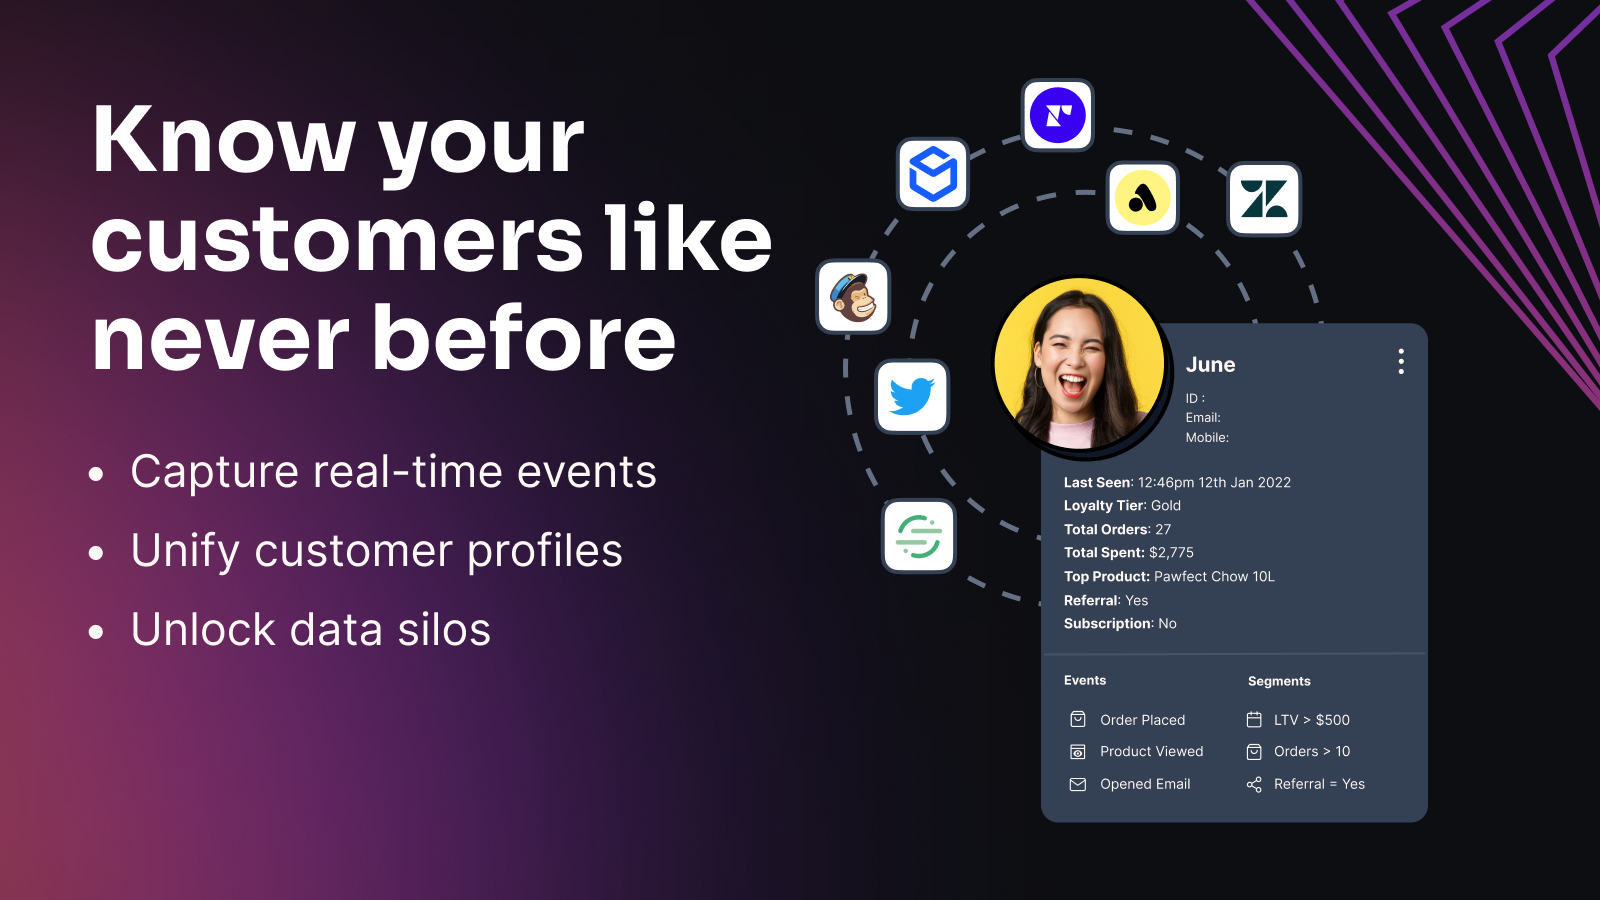 Understand your customers like never before